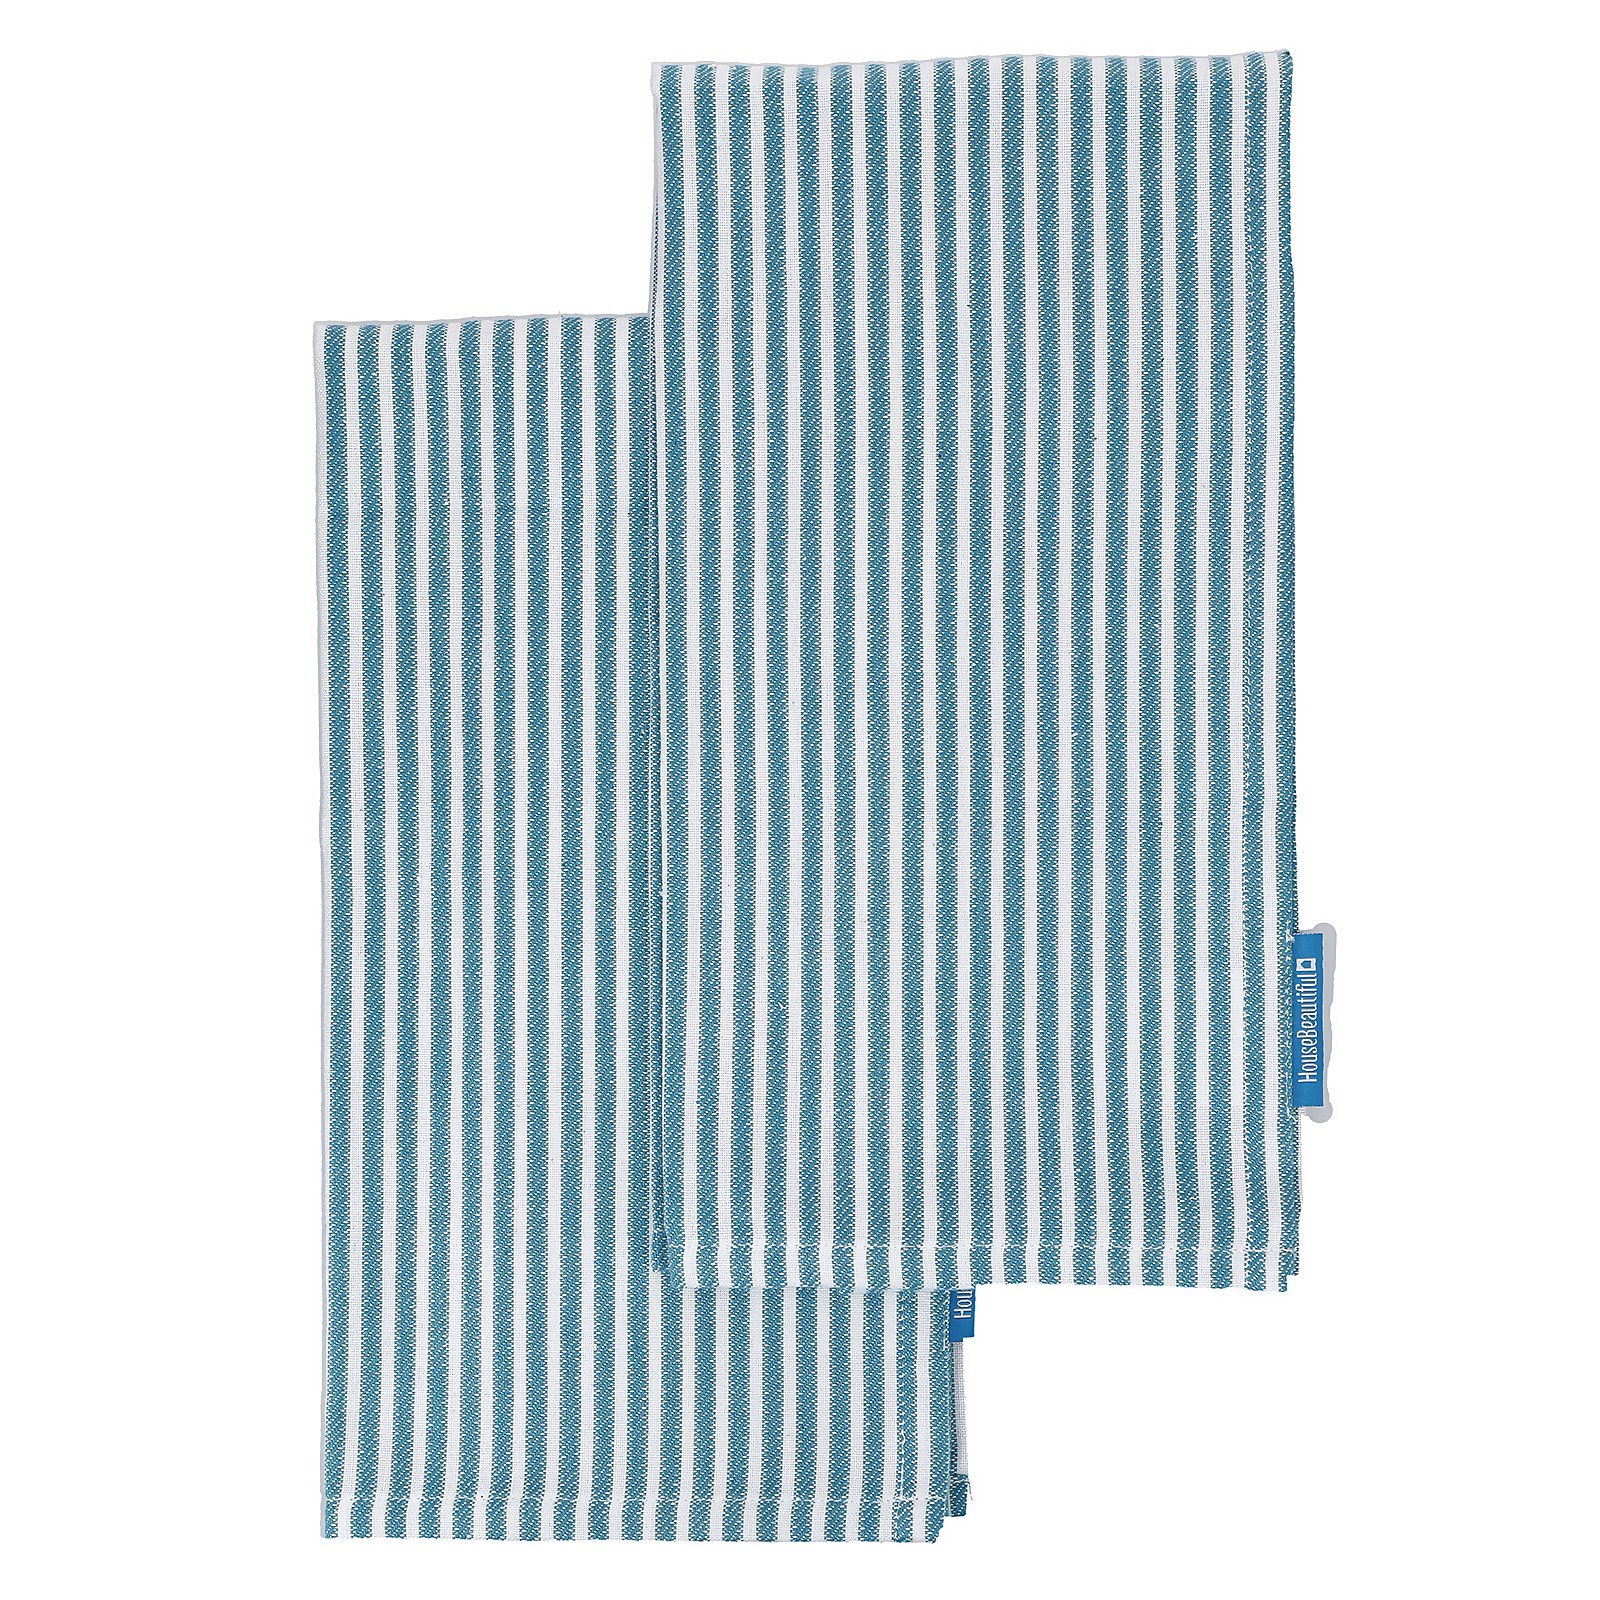 Photo of House Beautiful Woven Bold Stripe Tea Towels - 2 Pack - Teal